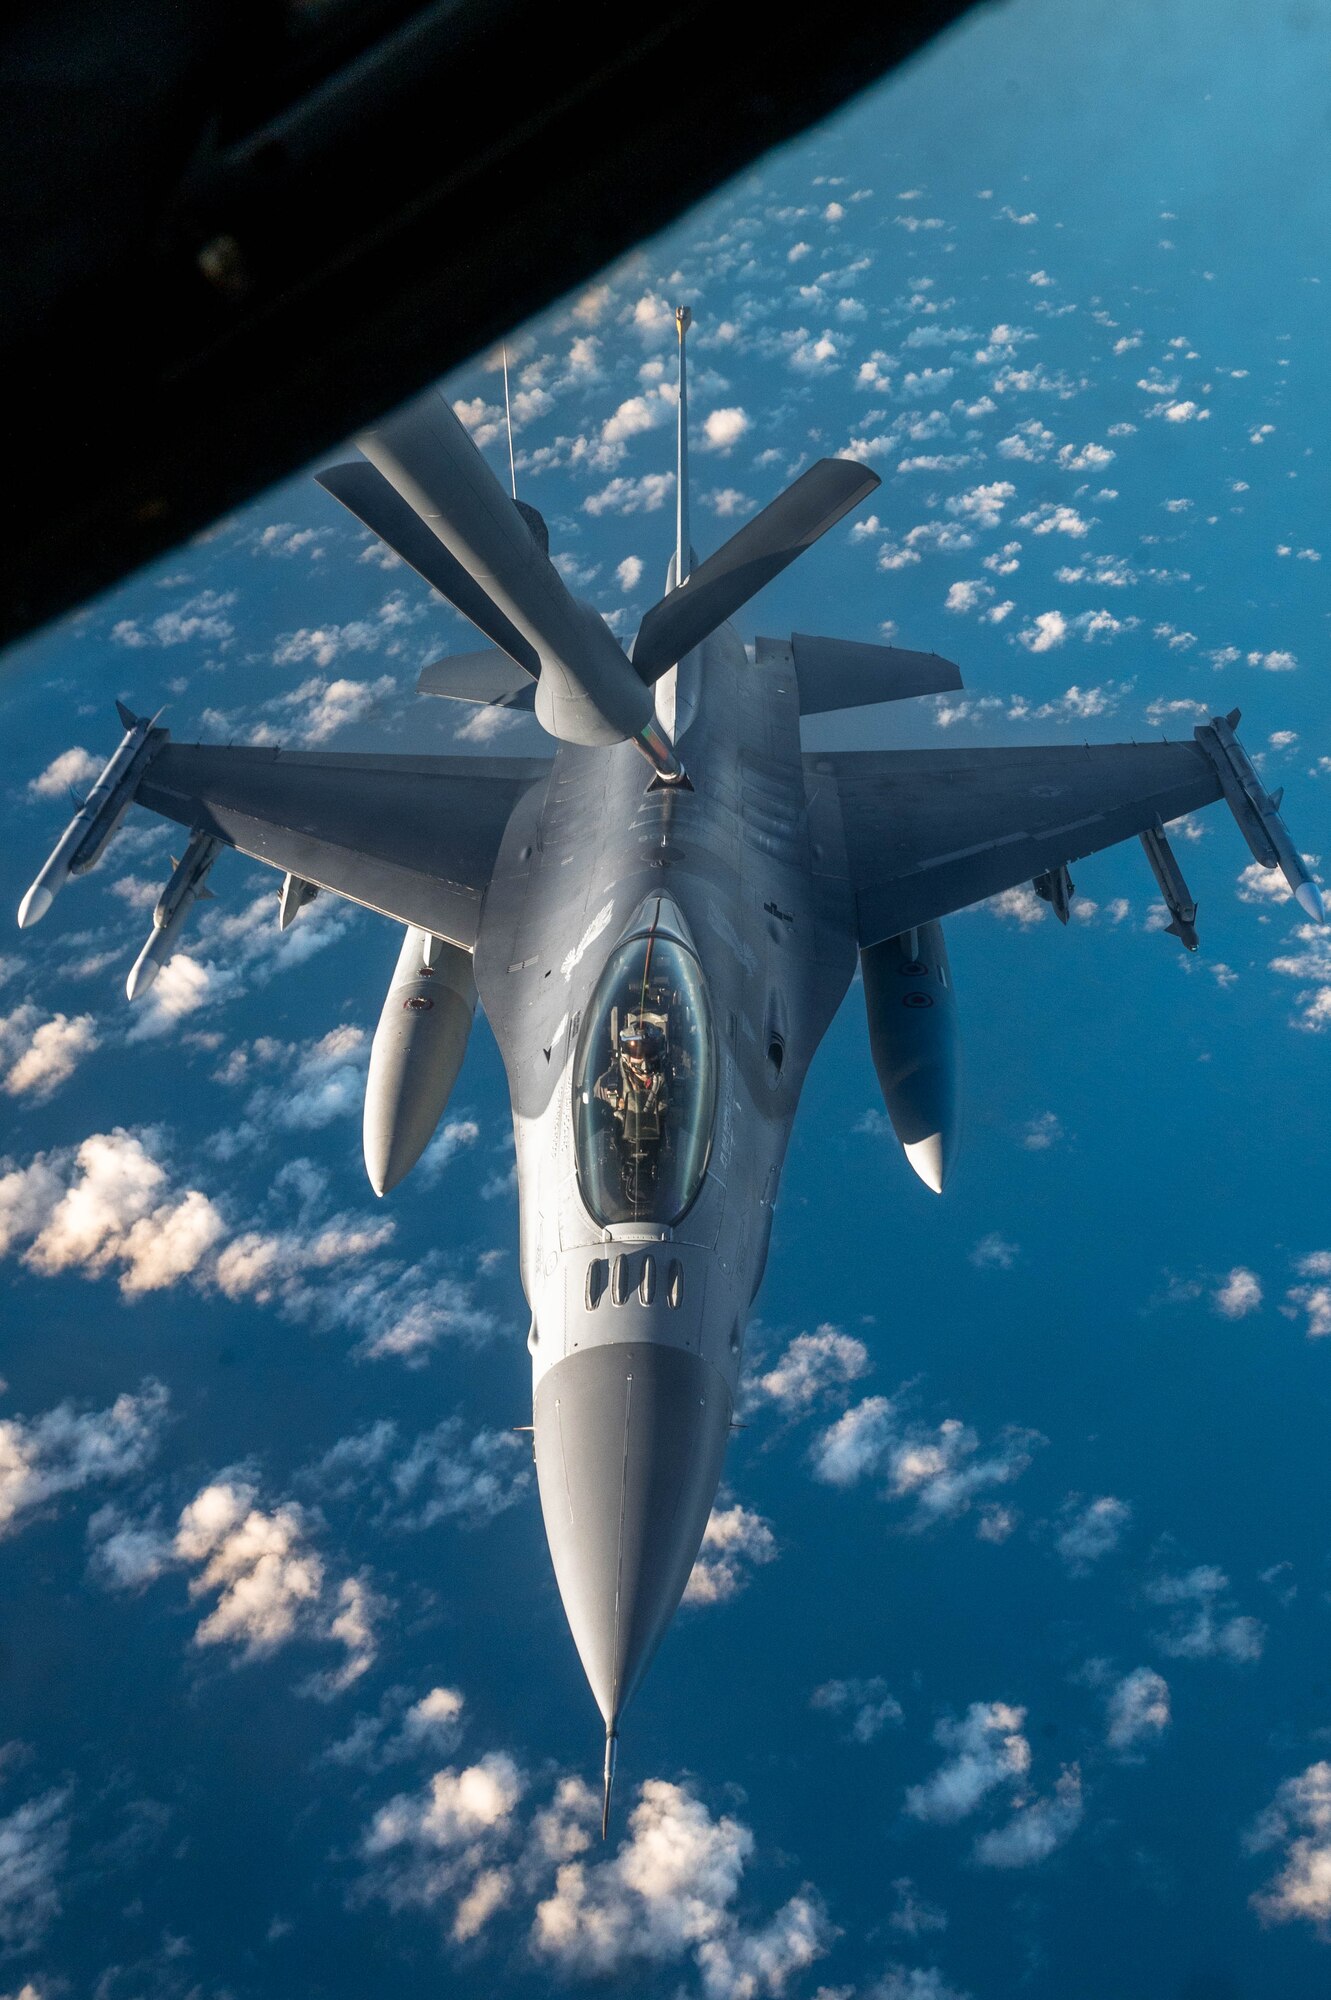 Airmen From Macdill Air Force Base, Florida refuel F-16 Fighting Falcons from Kadena Air Base, Japan in support of Mobility Guardian 2023 July 9th, 2023, over the Indo Pacific region. A multilateral endeavor, MG23 features seven participating countries - Australia, Canada, France, Japan, New Zealand, United Kingdom, and the United States - operating approximately 70 mobility aircraft across multiple locations spanning a 3,000 mile exercise area from July 5th through July 21. Our Allies and partners are one of our greatest strengths and a key strategic advantage. (U.S. Air Force photo by Shelby Rapert)